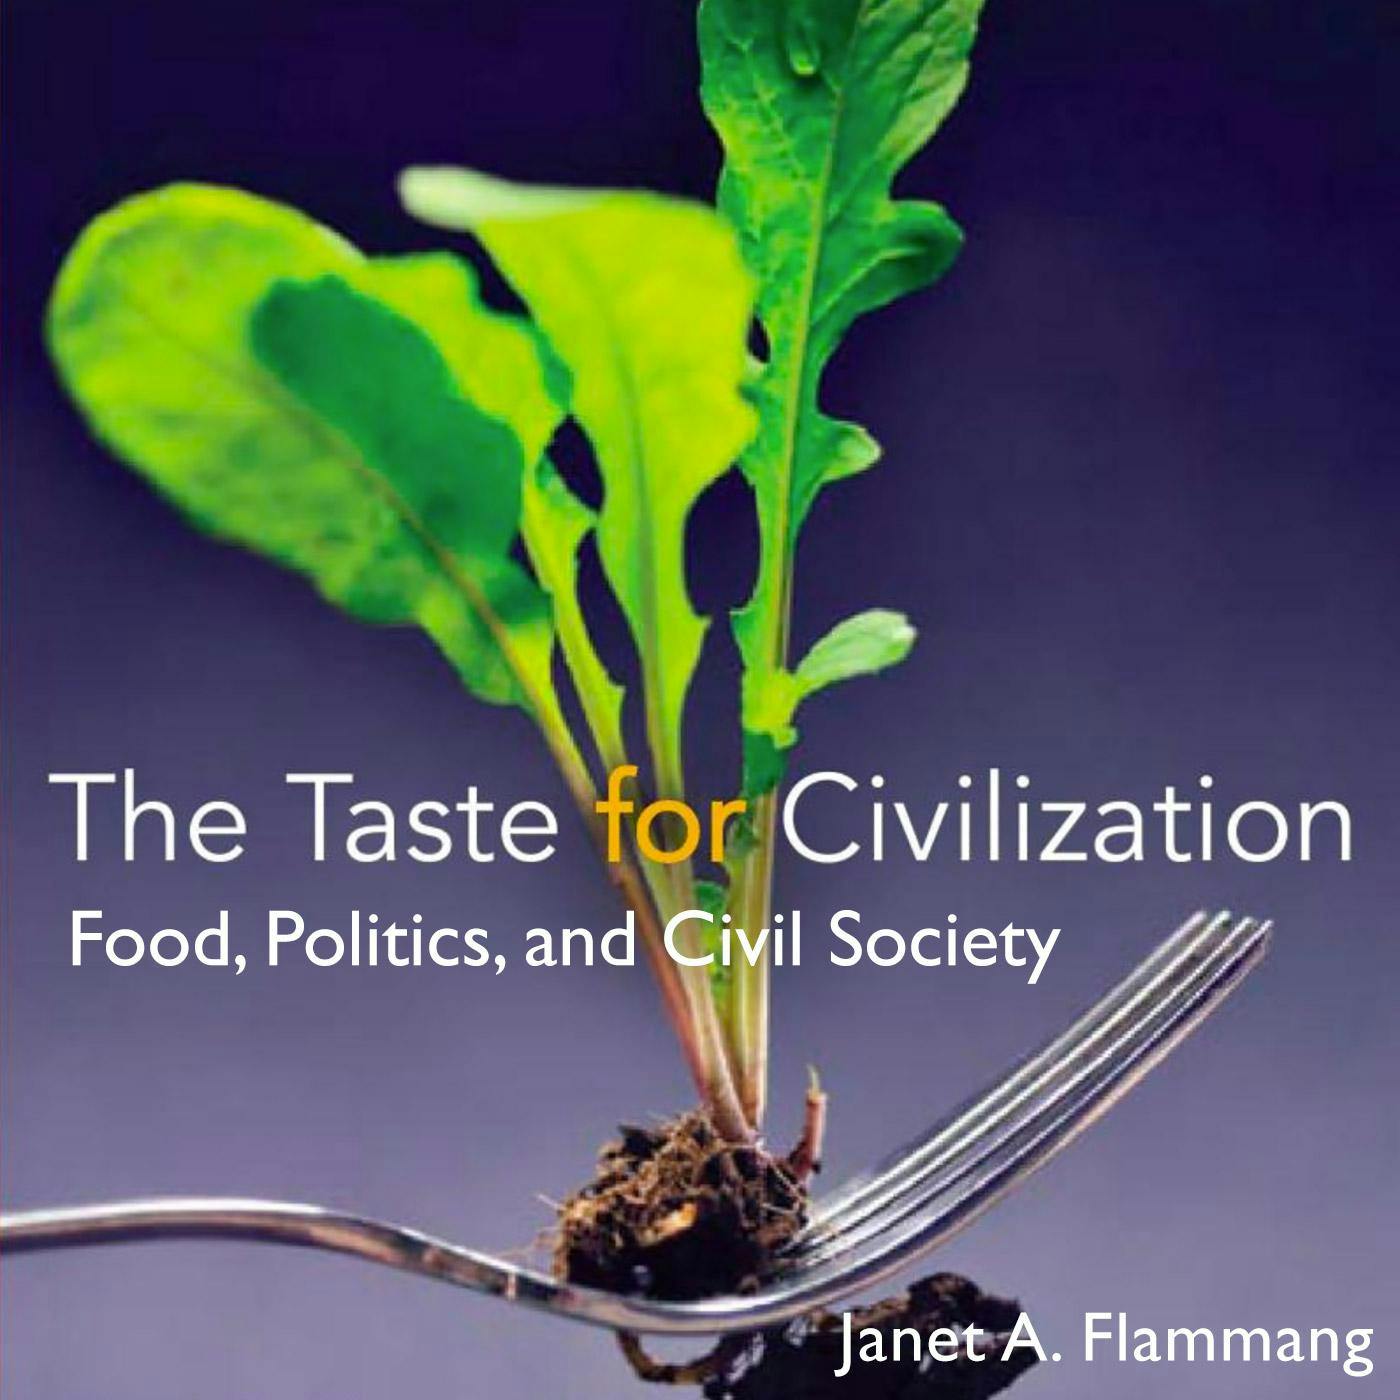 The Taste for Civilization: Food, Politics, and Civil Society - Janet A. Flammang